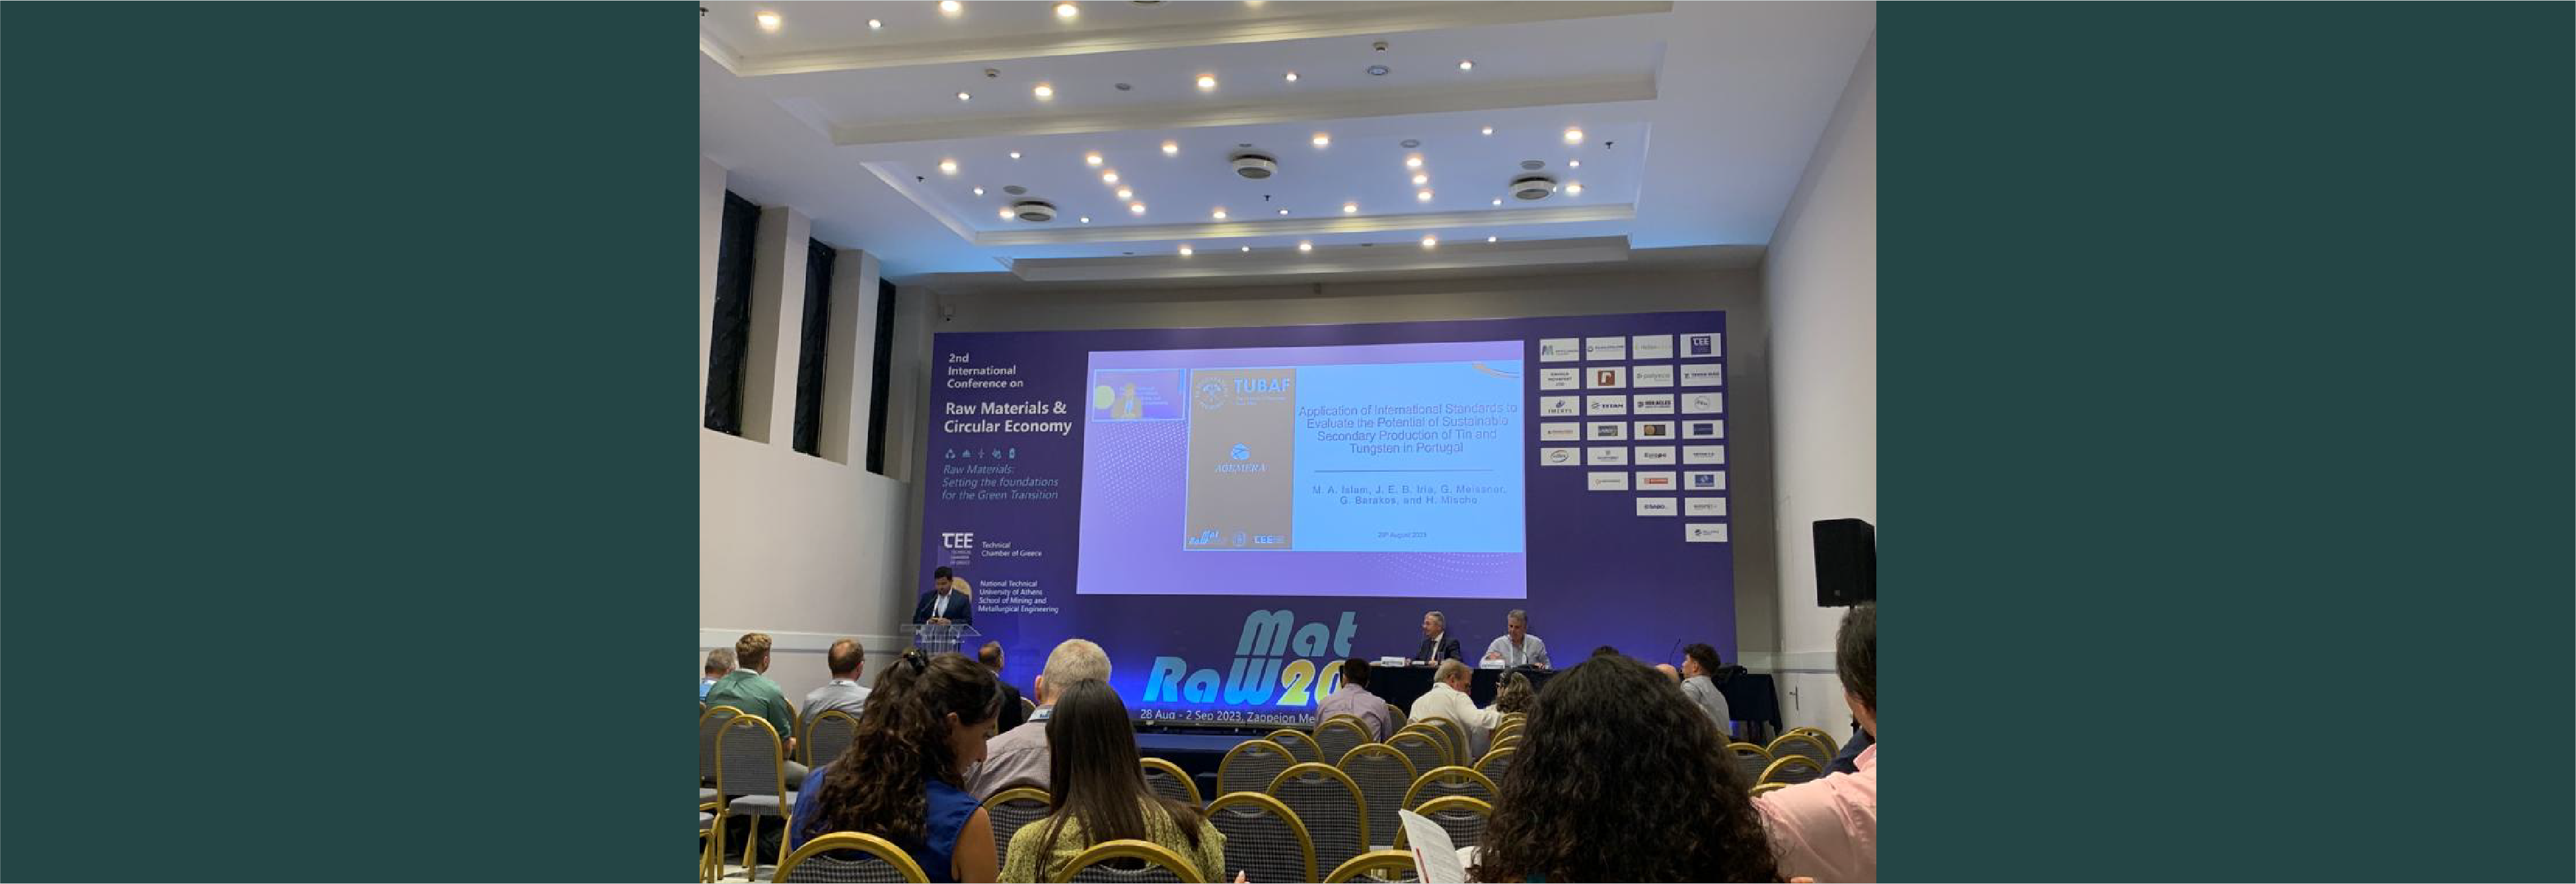 AGEMERA was present at the RawMat 2023 event in Athens